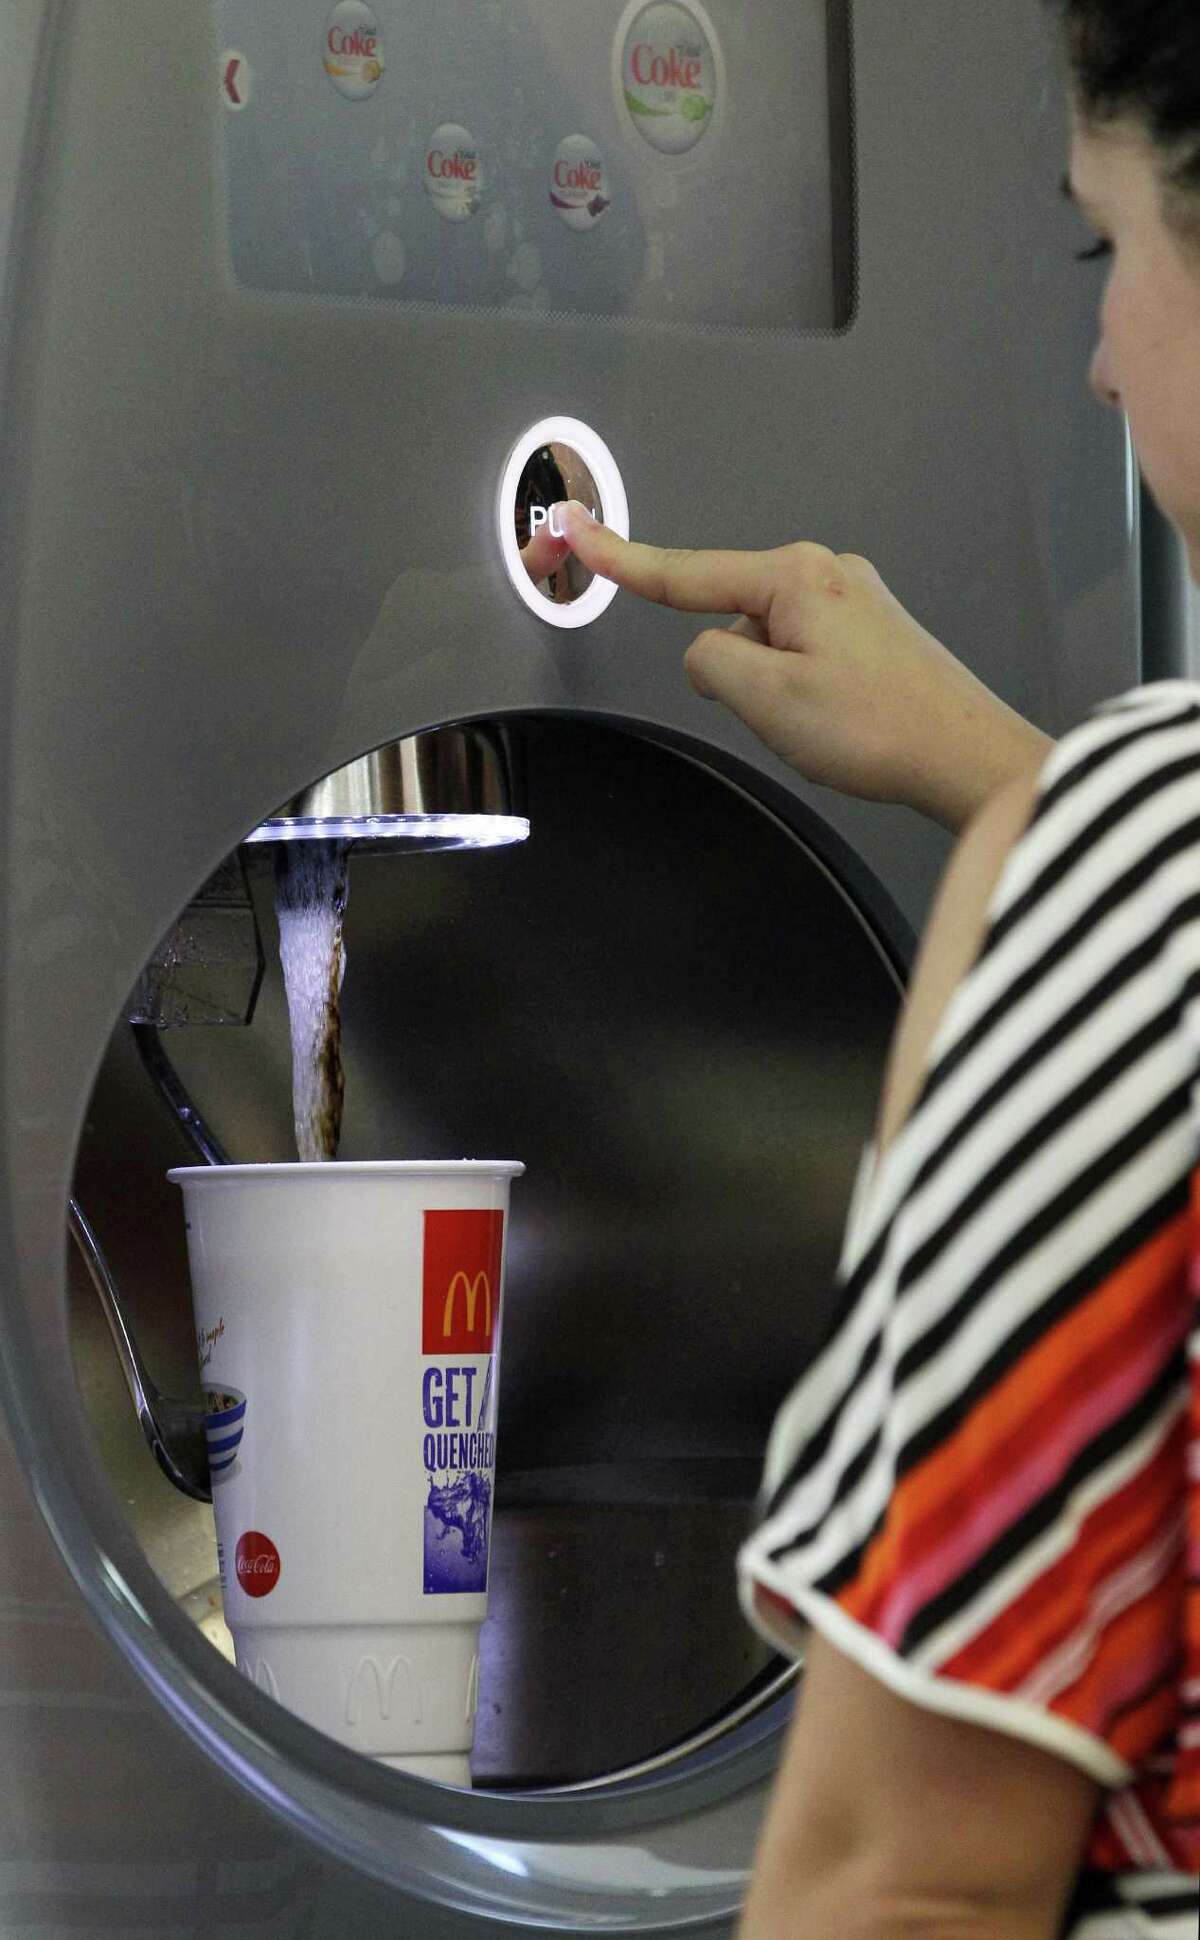 Christina Nunez fills a cup at a fast-food restaurant in New York. Nationally, more than half of front-line fast-food workers' families use at least one public assistance program.